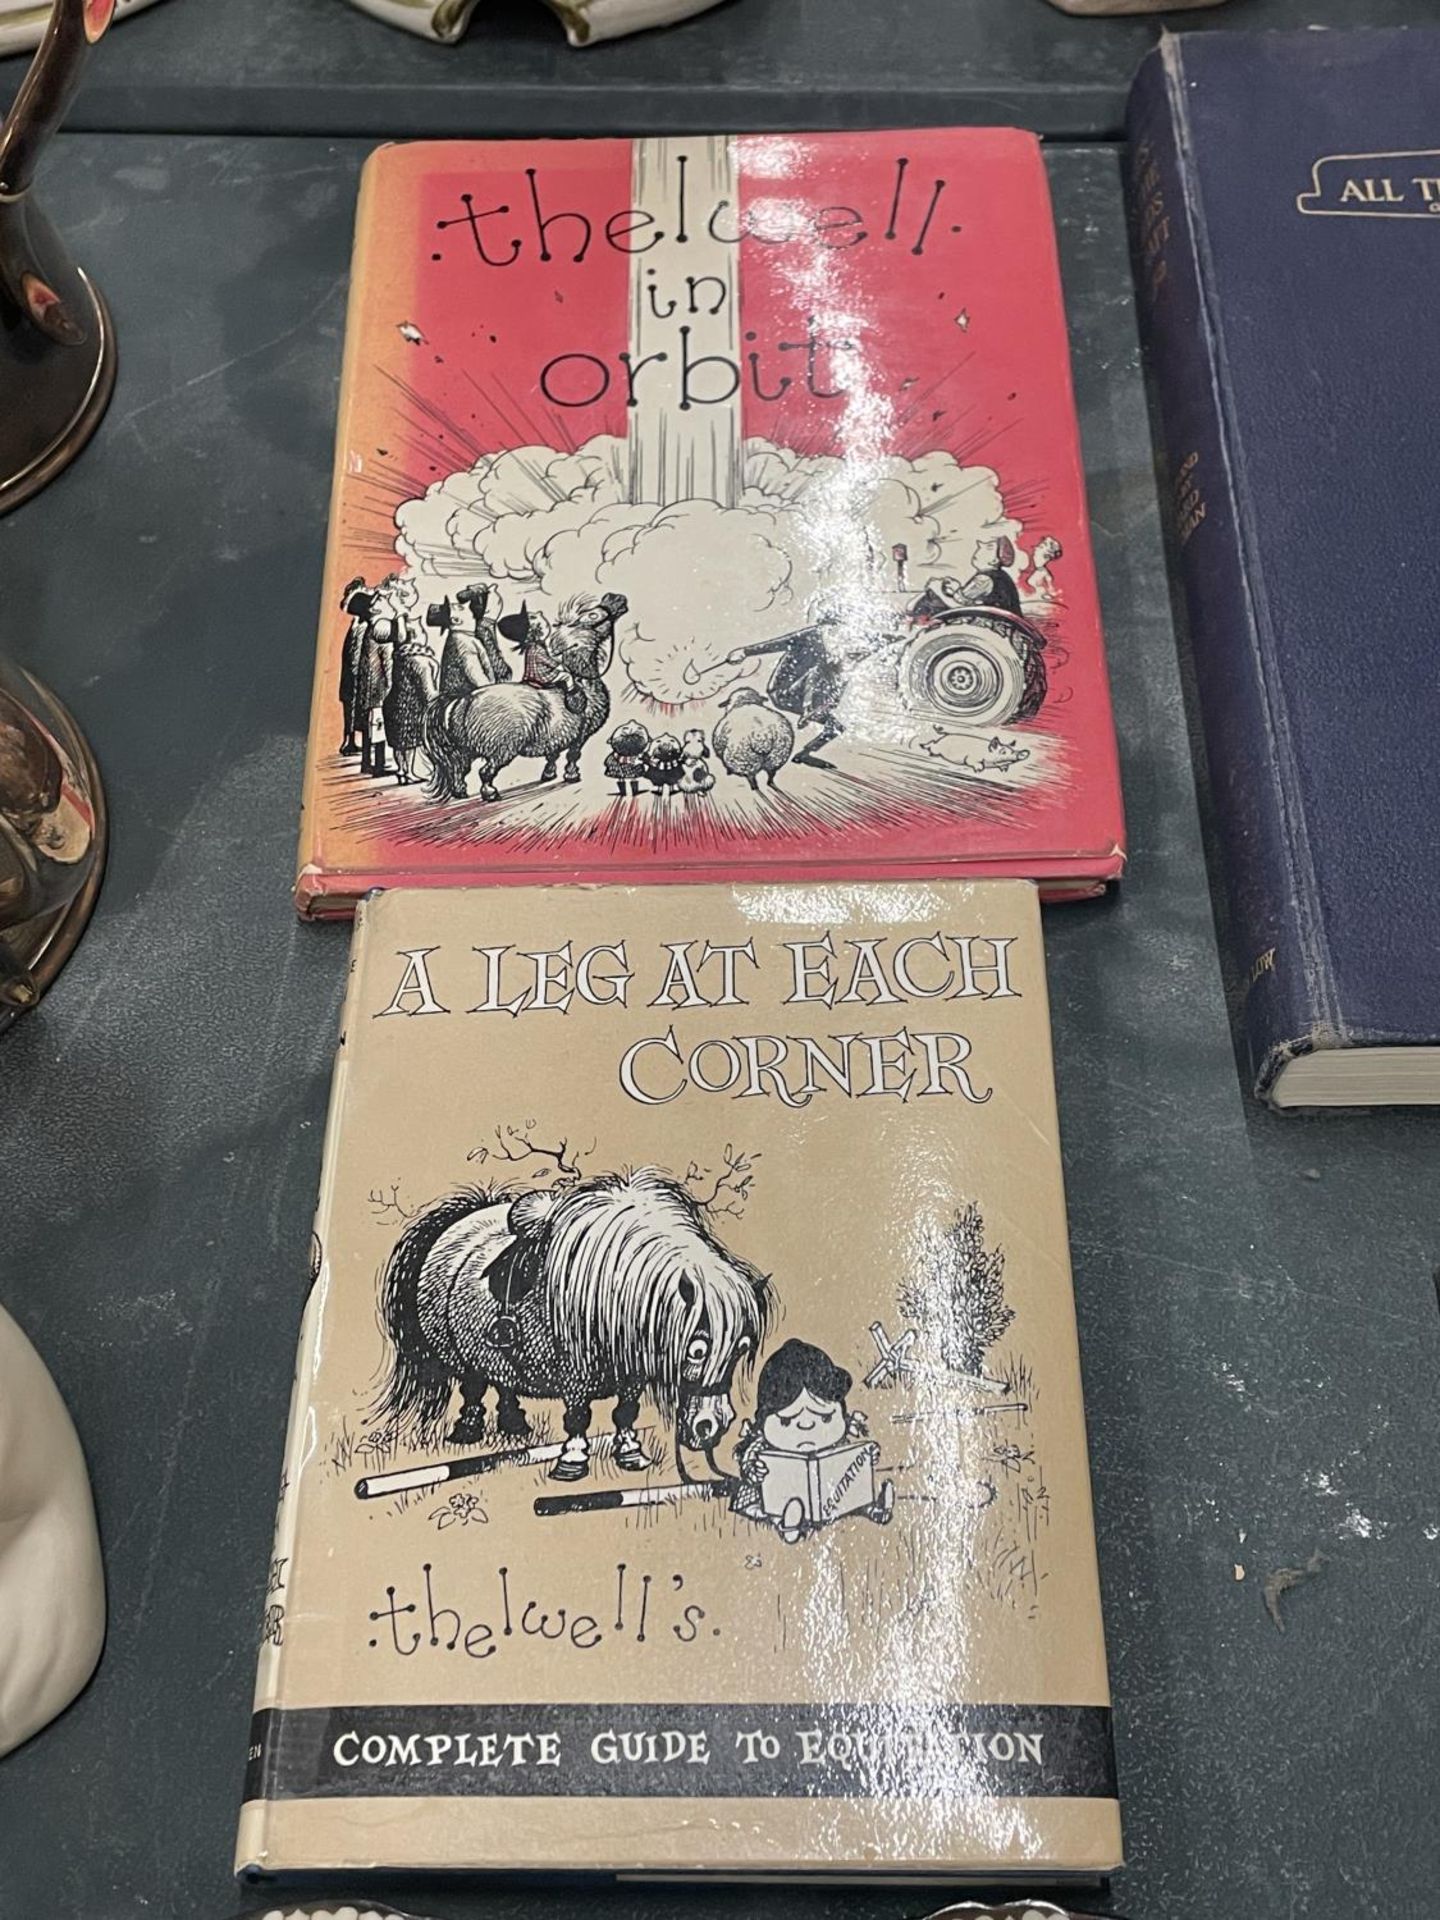 TWO VINTAGE THELWELL HARDBACKBOOKS TO INCLUDE 'A LEG AT EACH CORNER' AND 'THELWELL IN ORBIT'